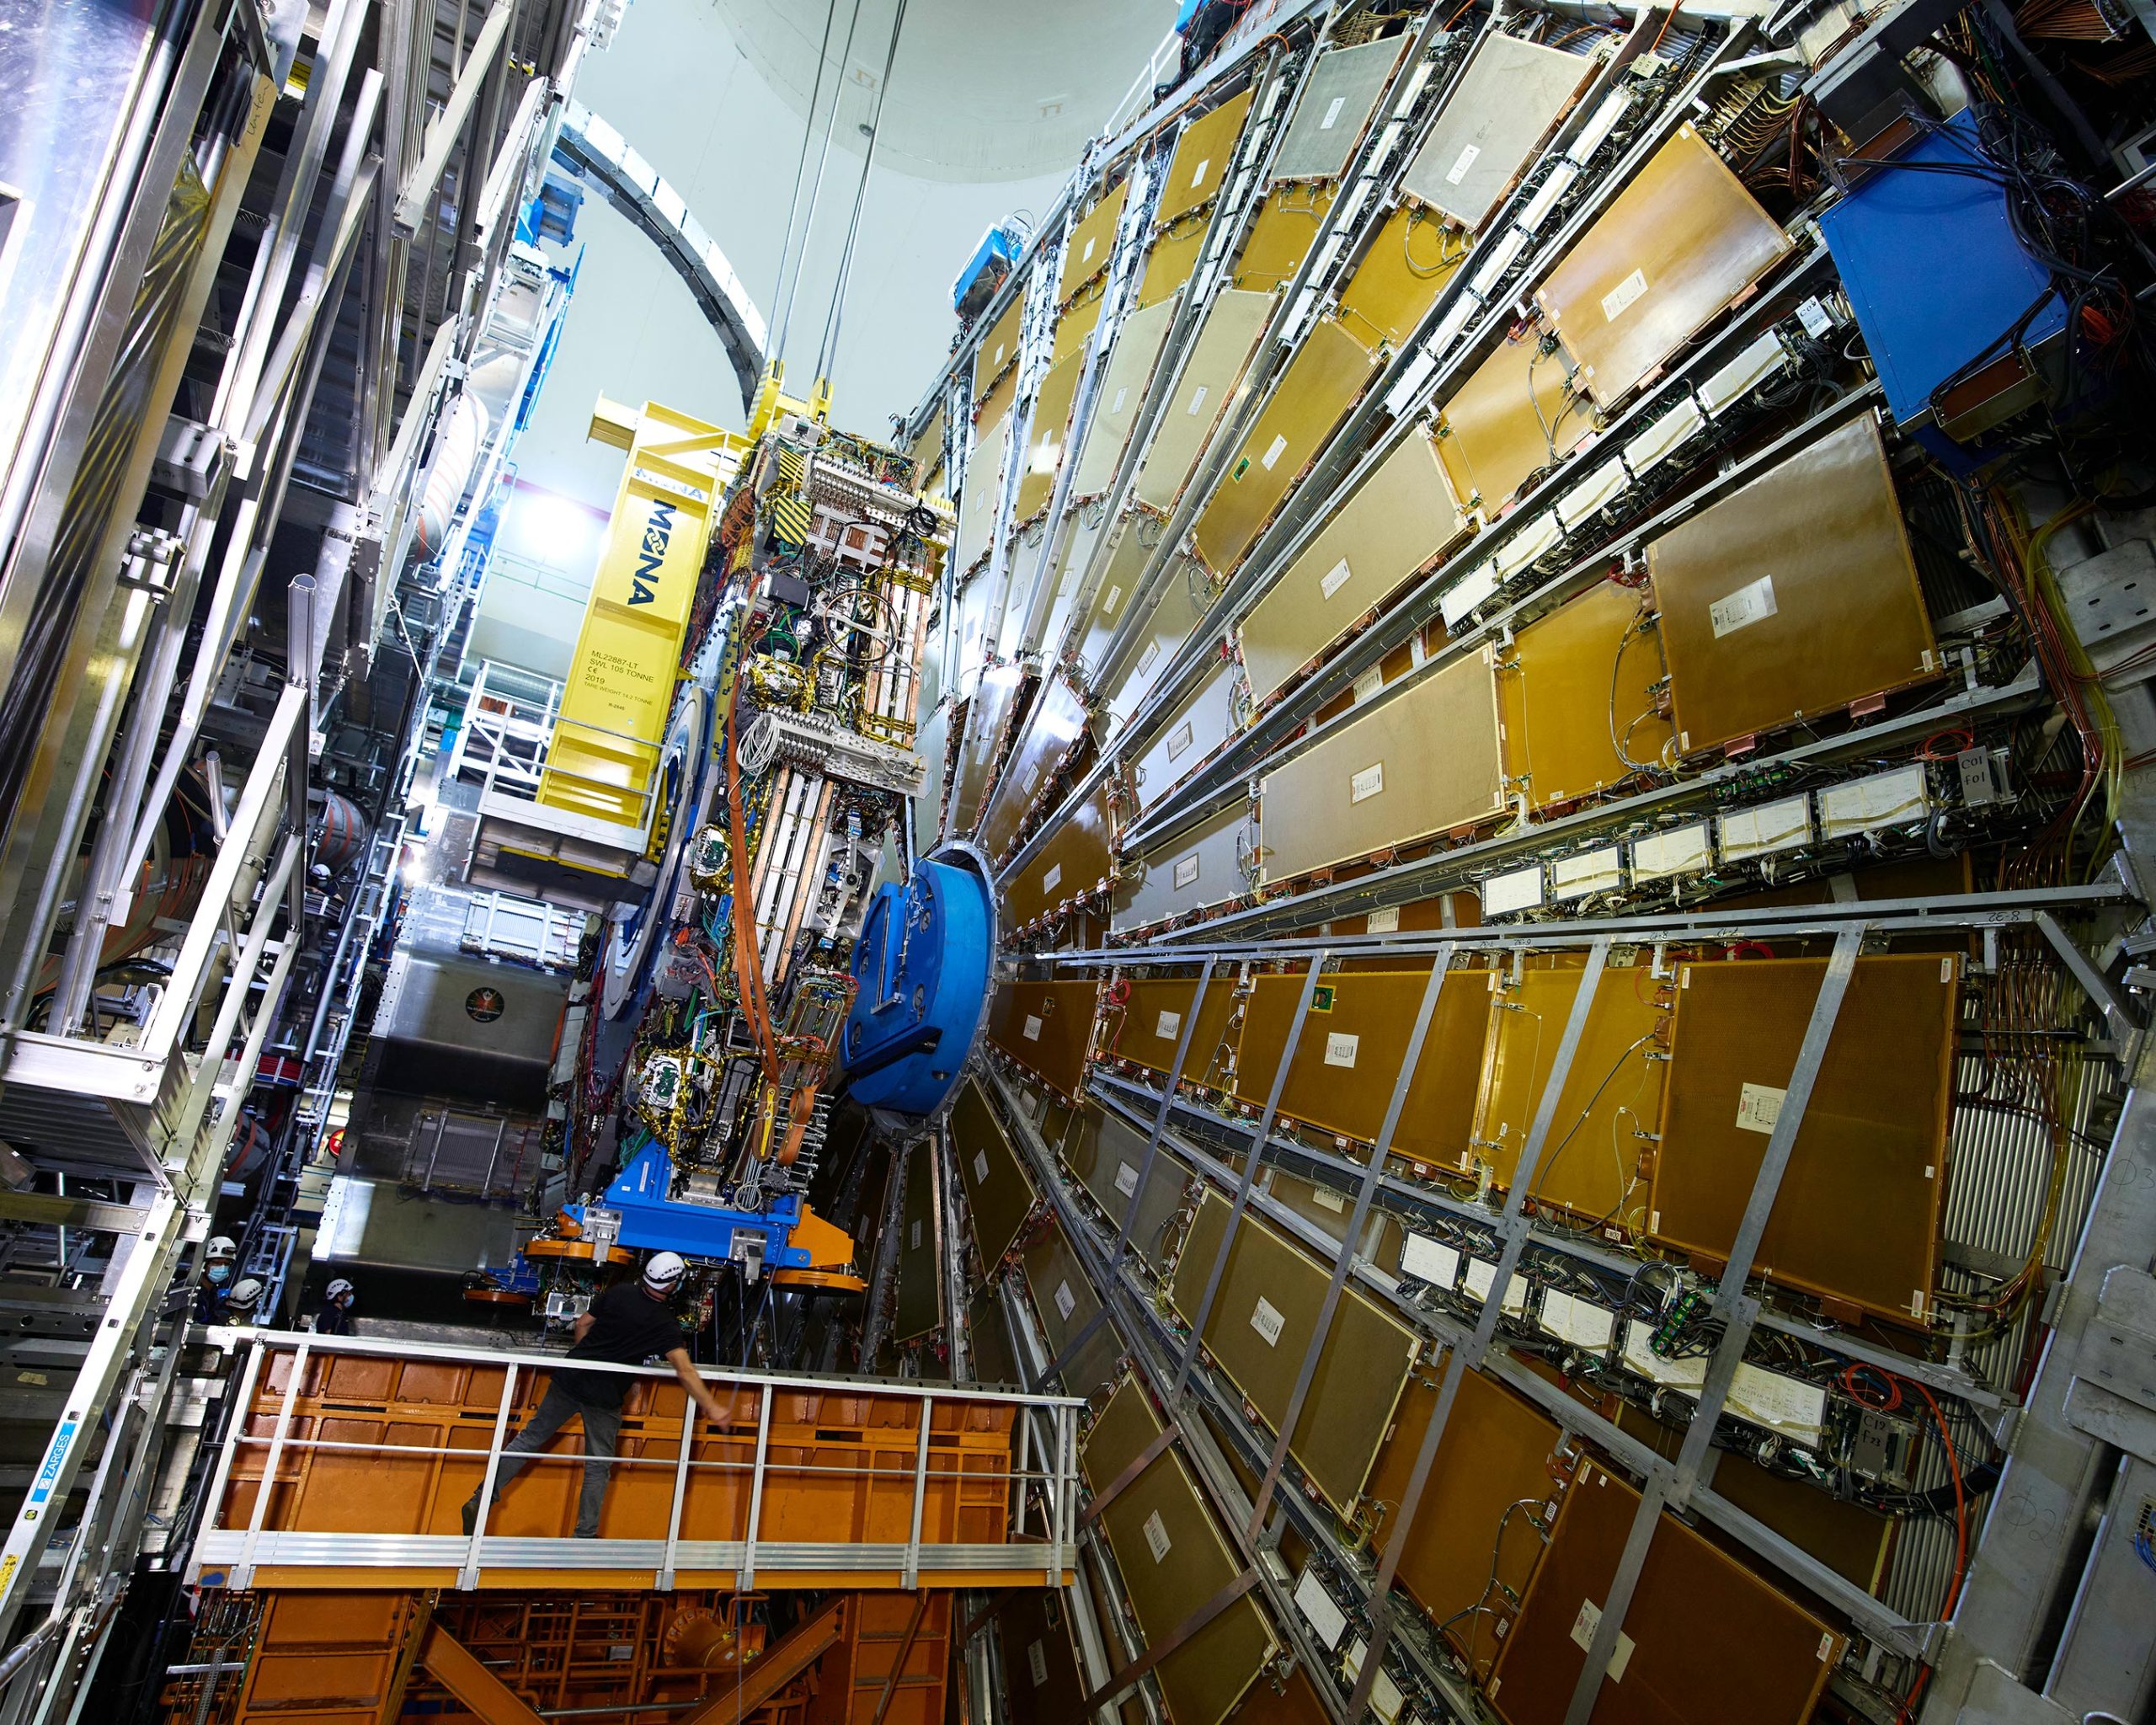 Large Hadron Collider New Insight Into the Internal Structure of the Proton